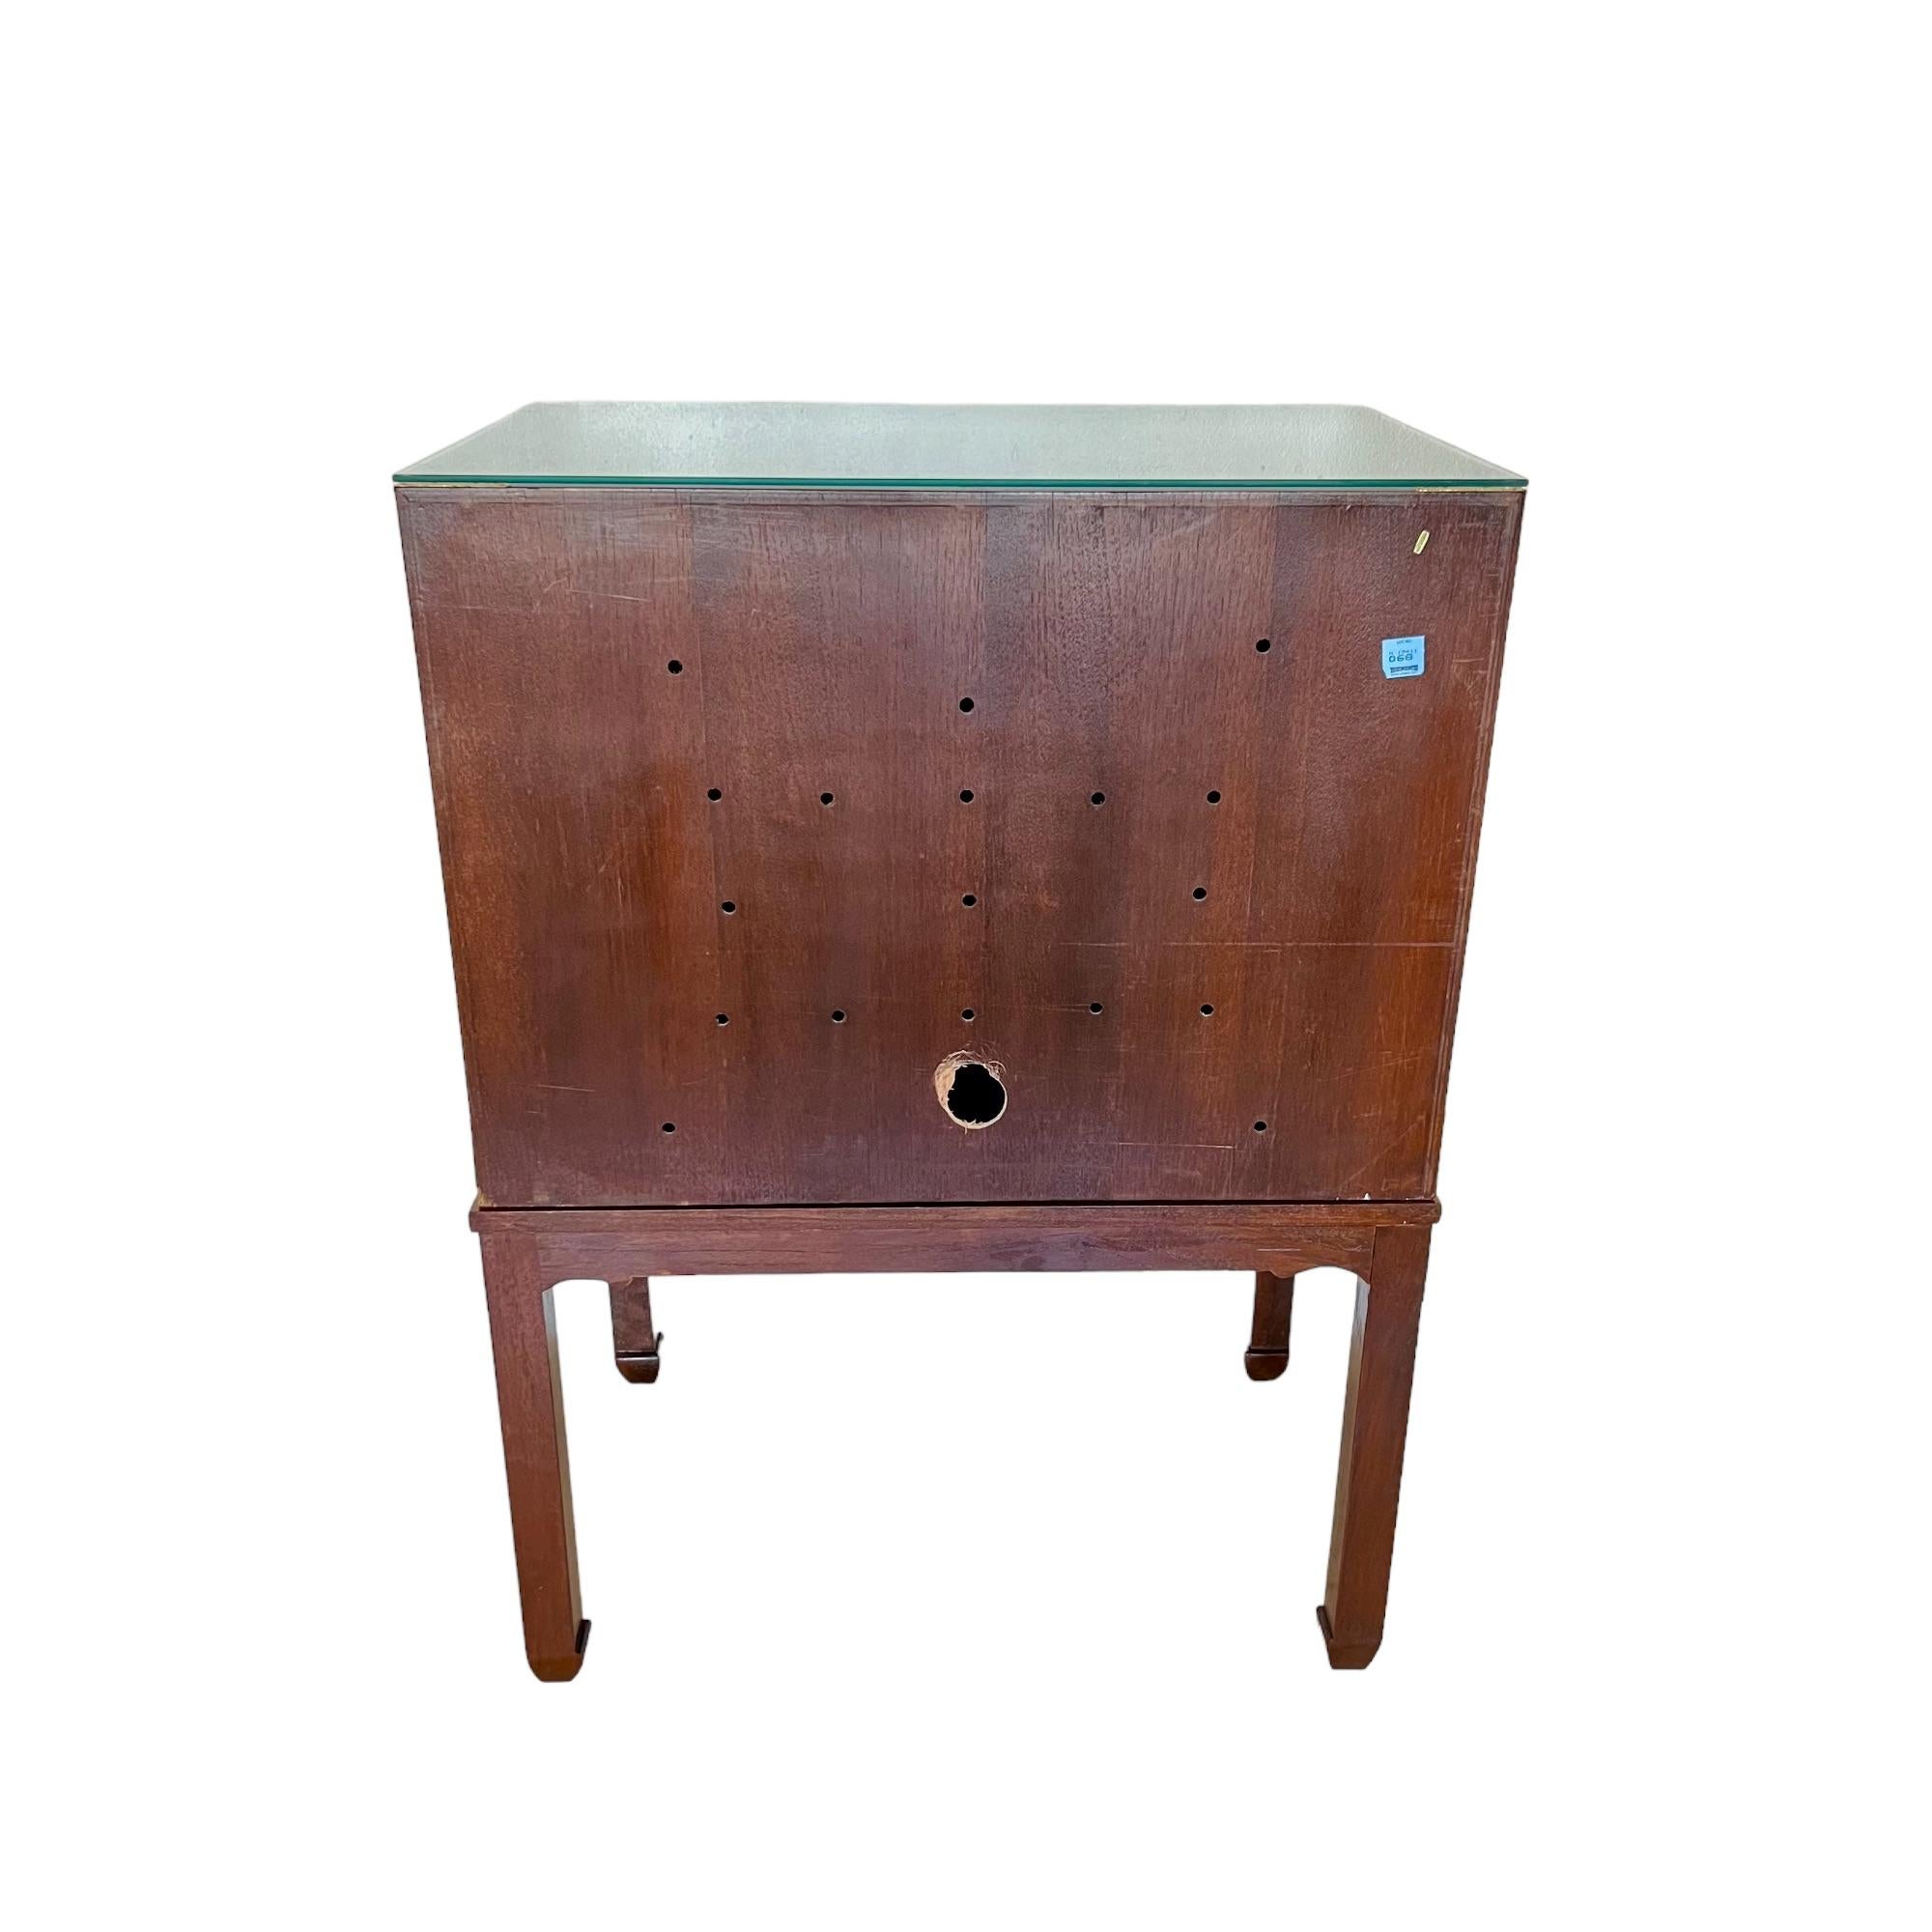 Chinoiserie Teak & Burl Brass Mounted Cabinet on Stand, 1970s For Sale 6